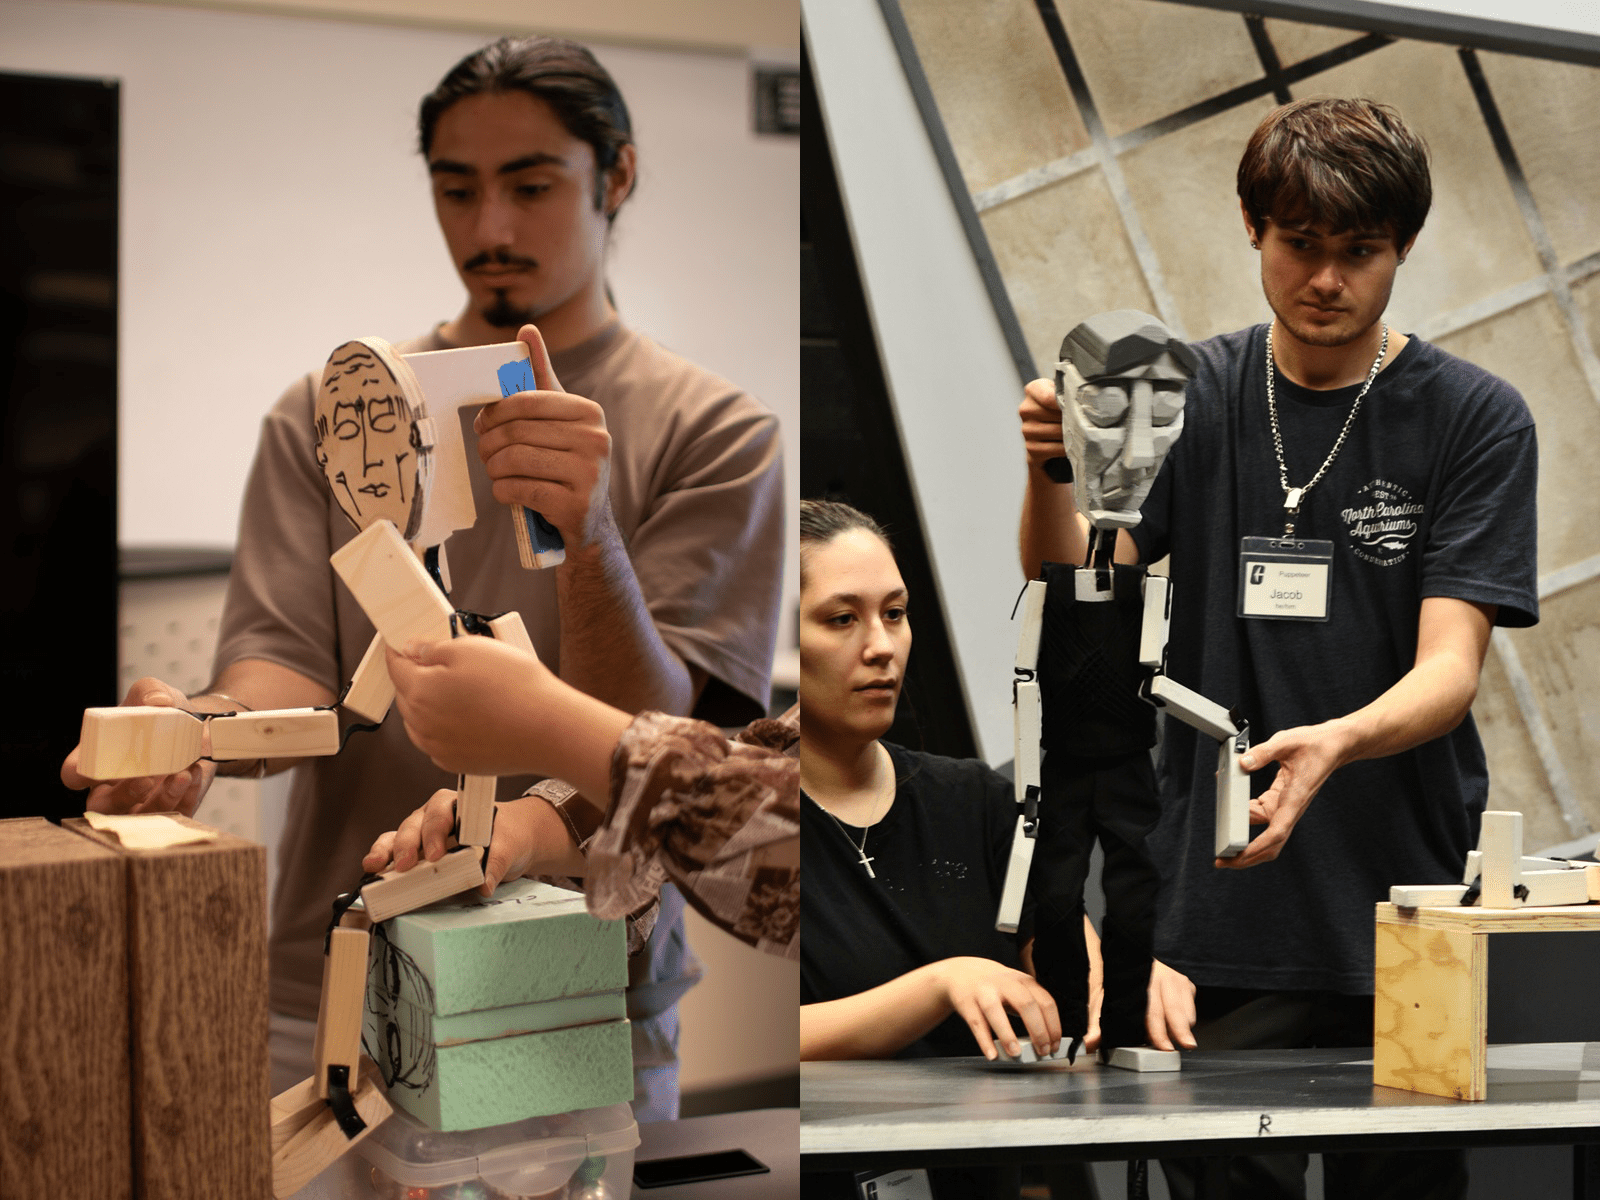 composite image of students Diego Milner and Jacob Scannell operating puppets